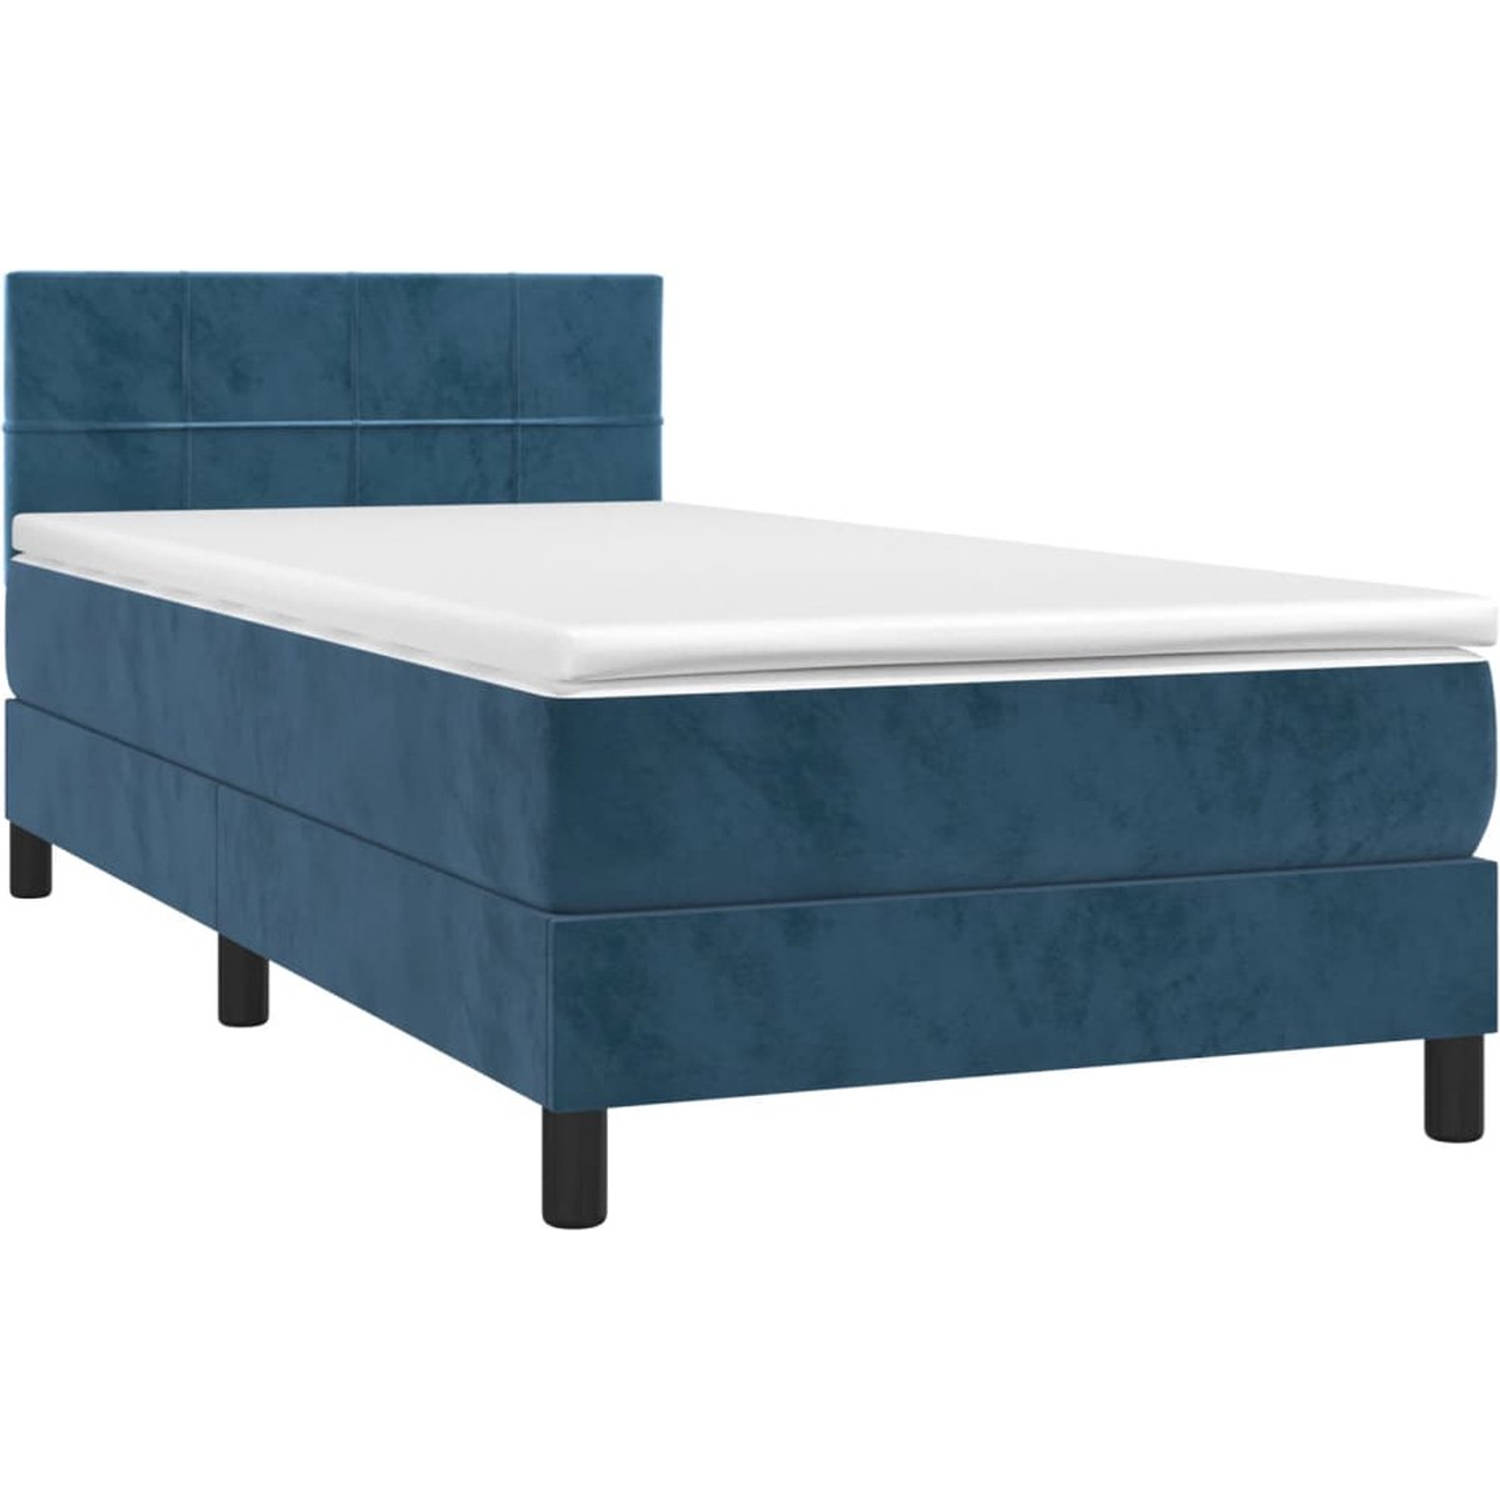 The Living Store Bed Donkerblauw Fluweel - Pocketvering - LED - 203x80x78/88 cm